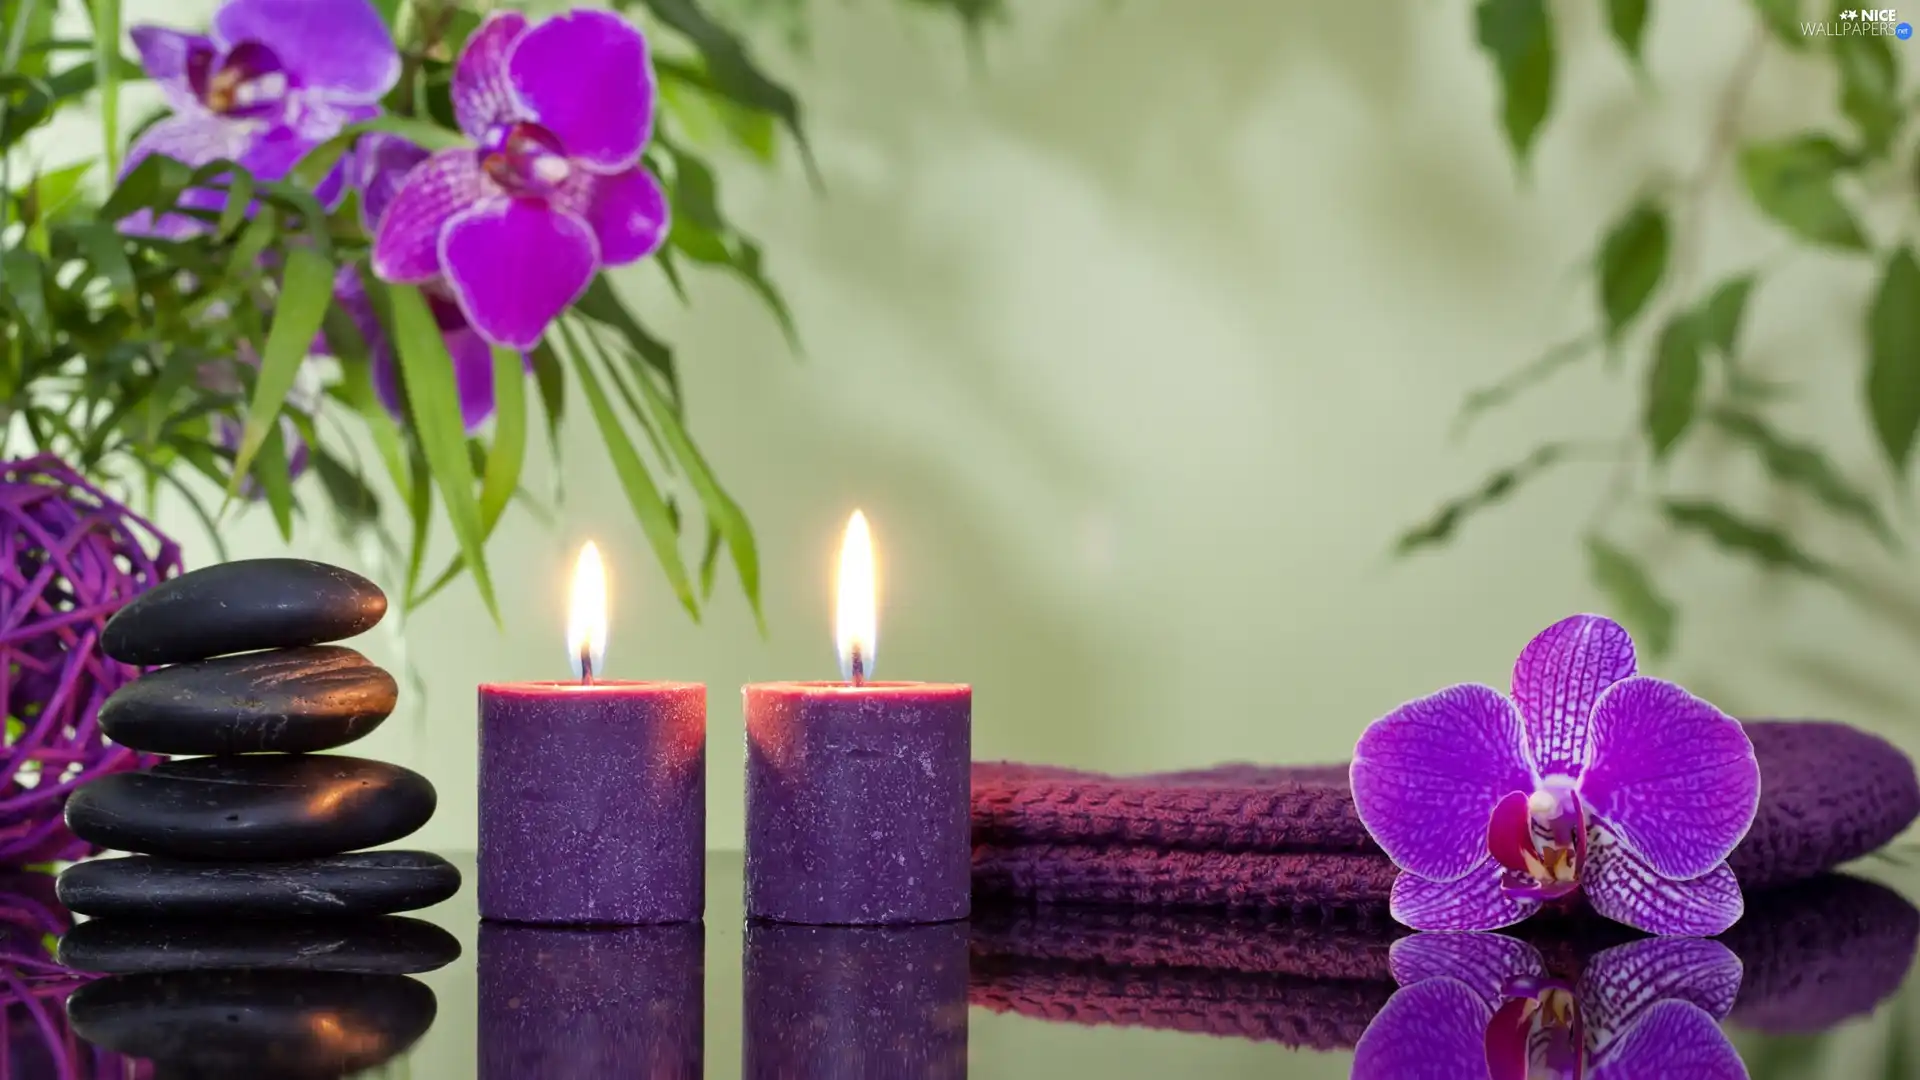 orchids, Spa, Candles, purple, composition, Two, Stones